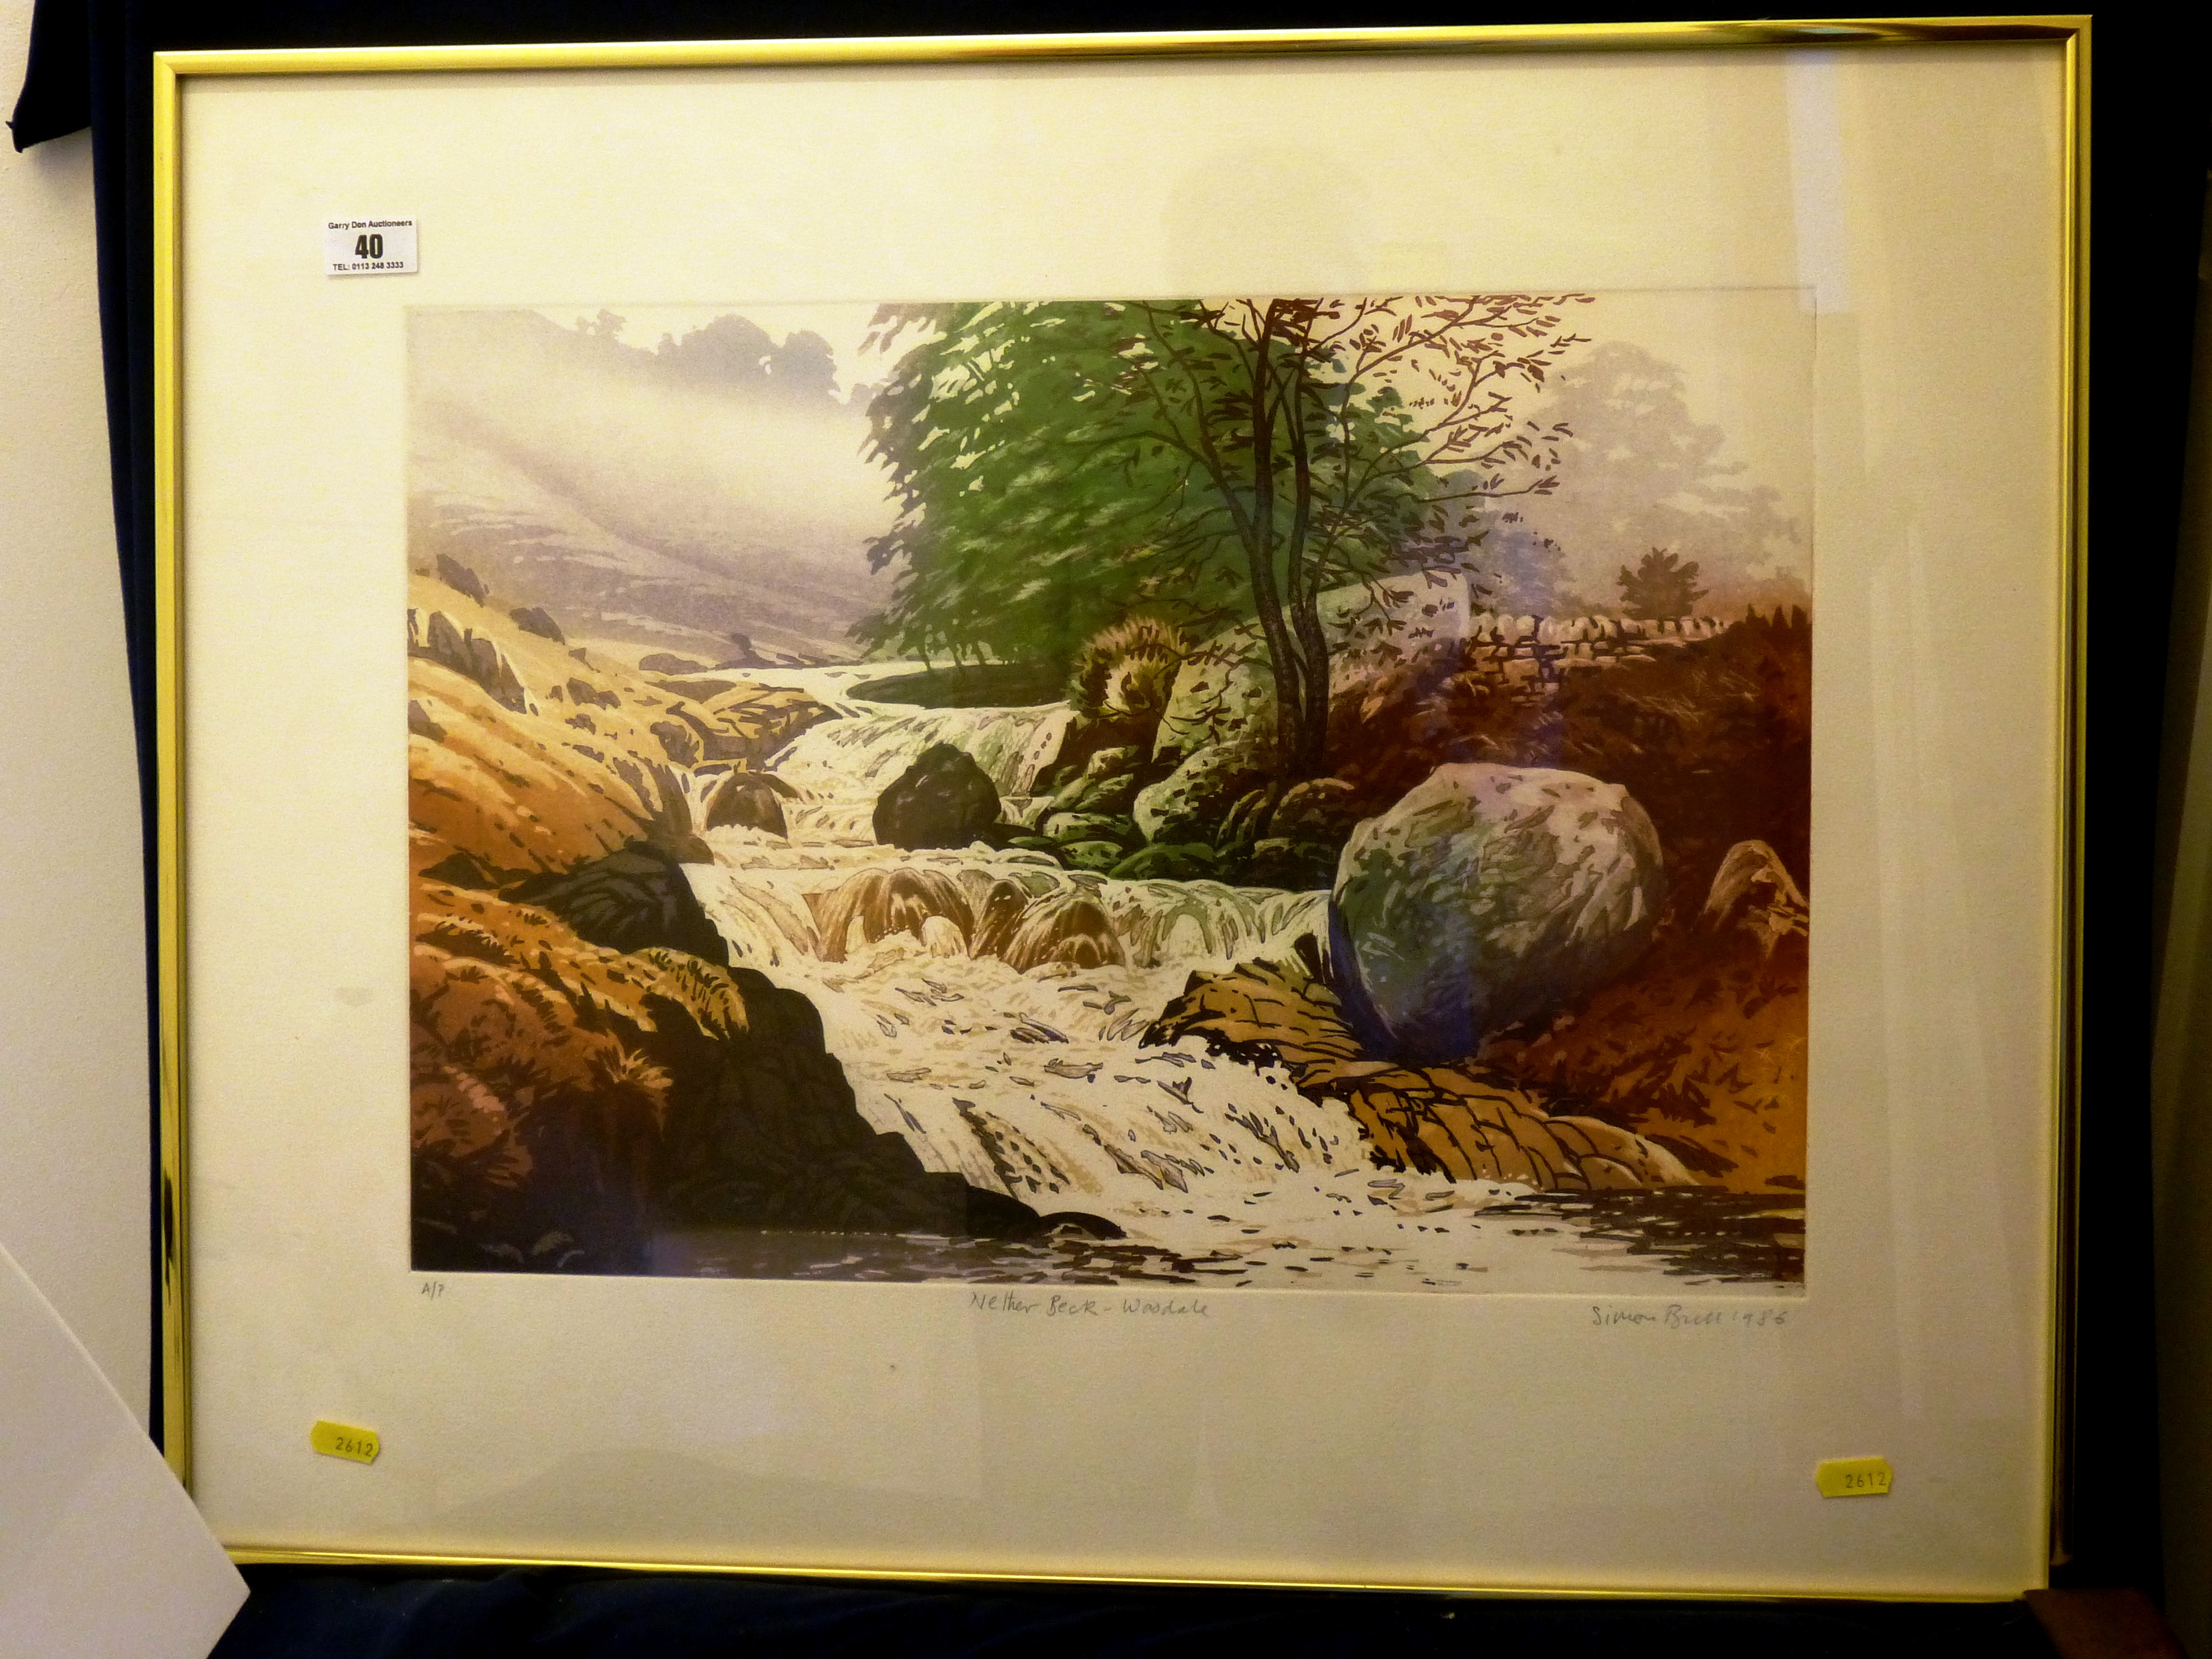 ARTIST PROOF PRINT OF NETHER BECK - WASDALE BY SIMON WASDALE APPROX 13.5" X 19.5"